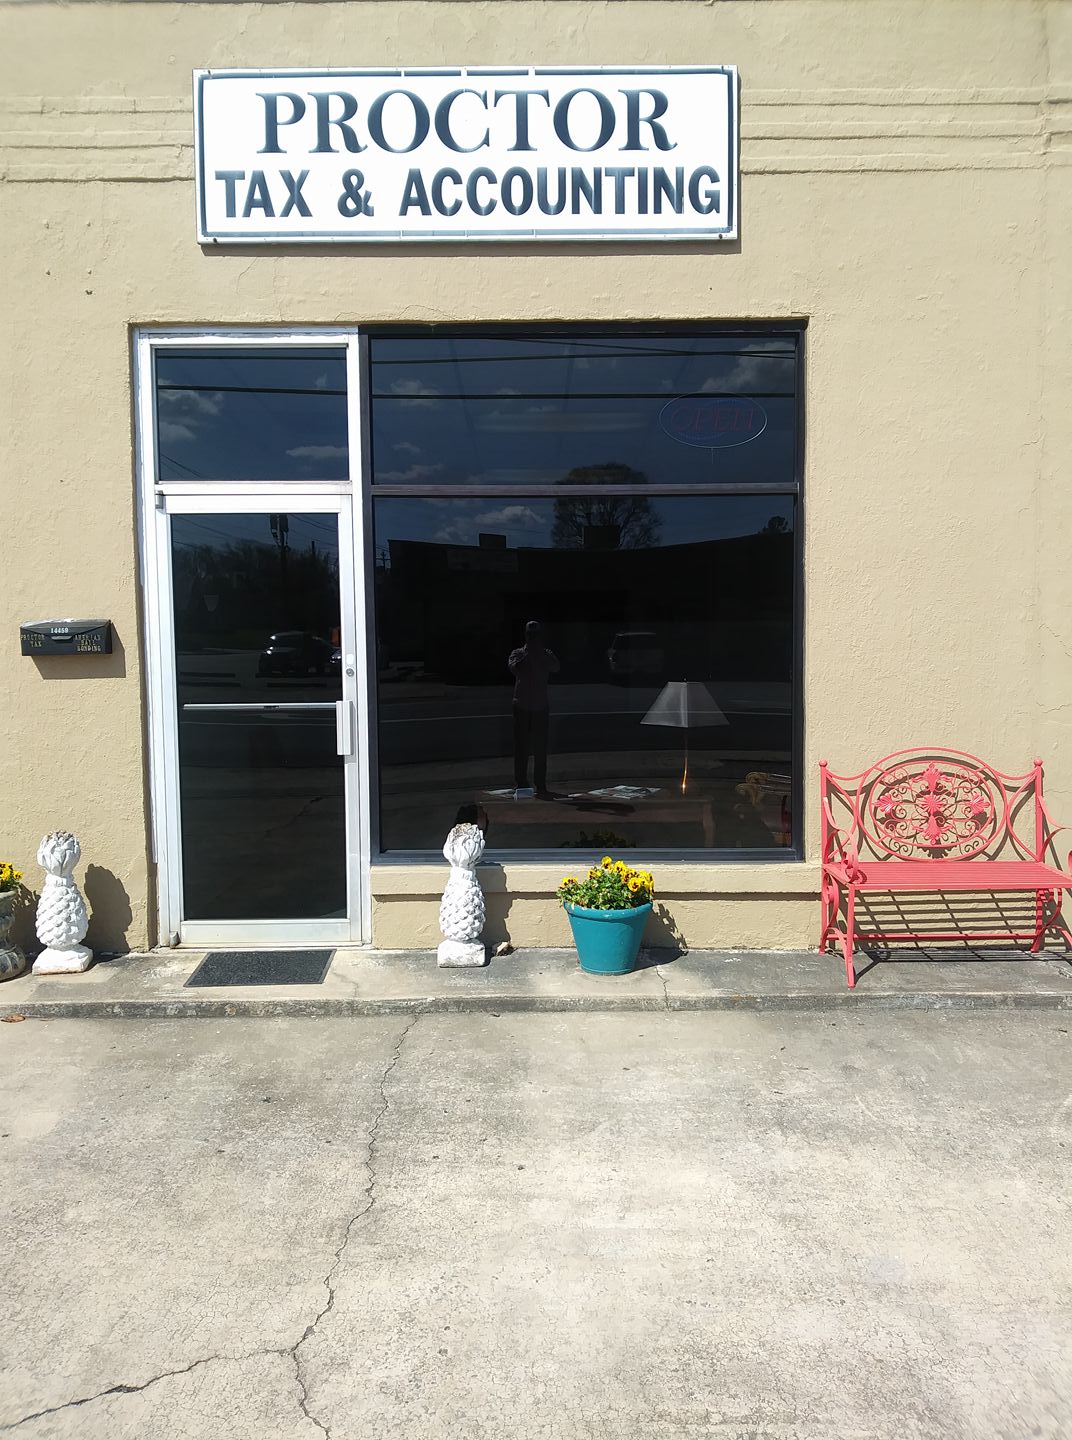 Proctor Tax & Accounting Services 14459 Court St, Moulton Alabama 35650